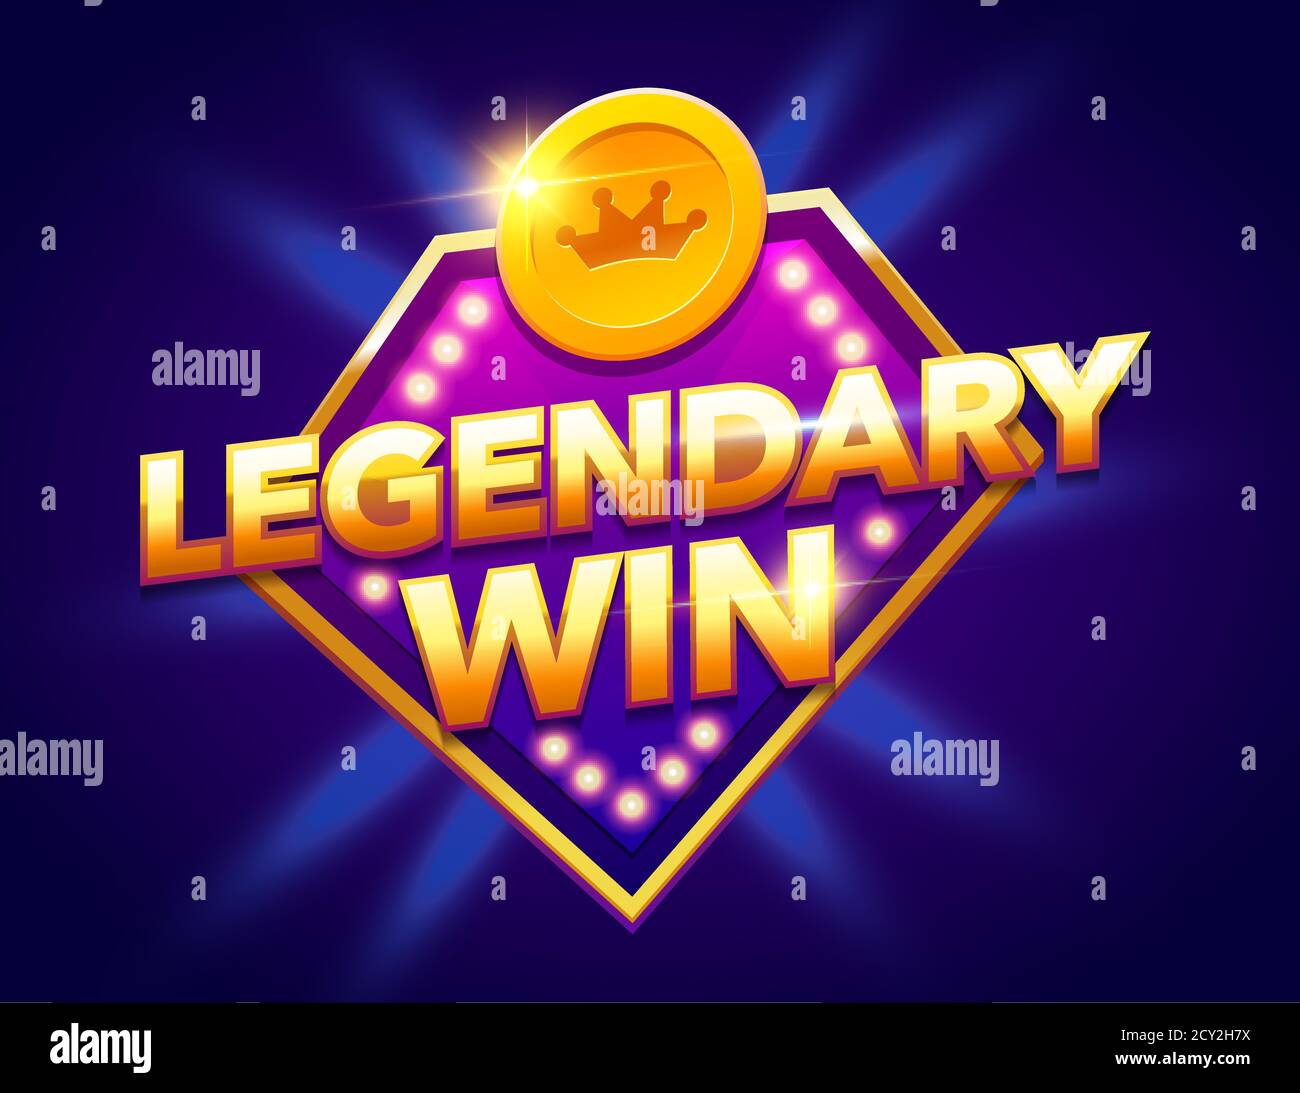 Retro sign with lamp Legendary Win banner. Vector illustration design with poker Stock Vector